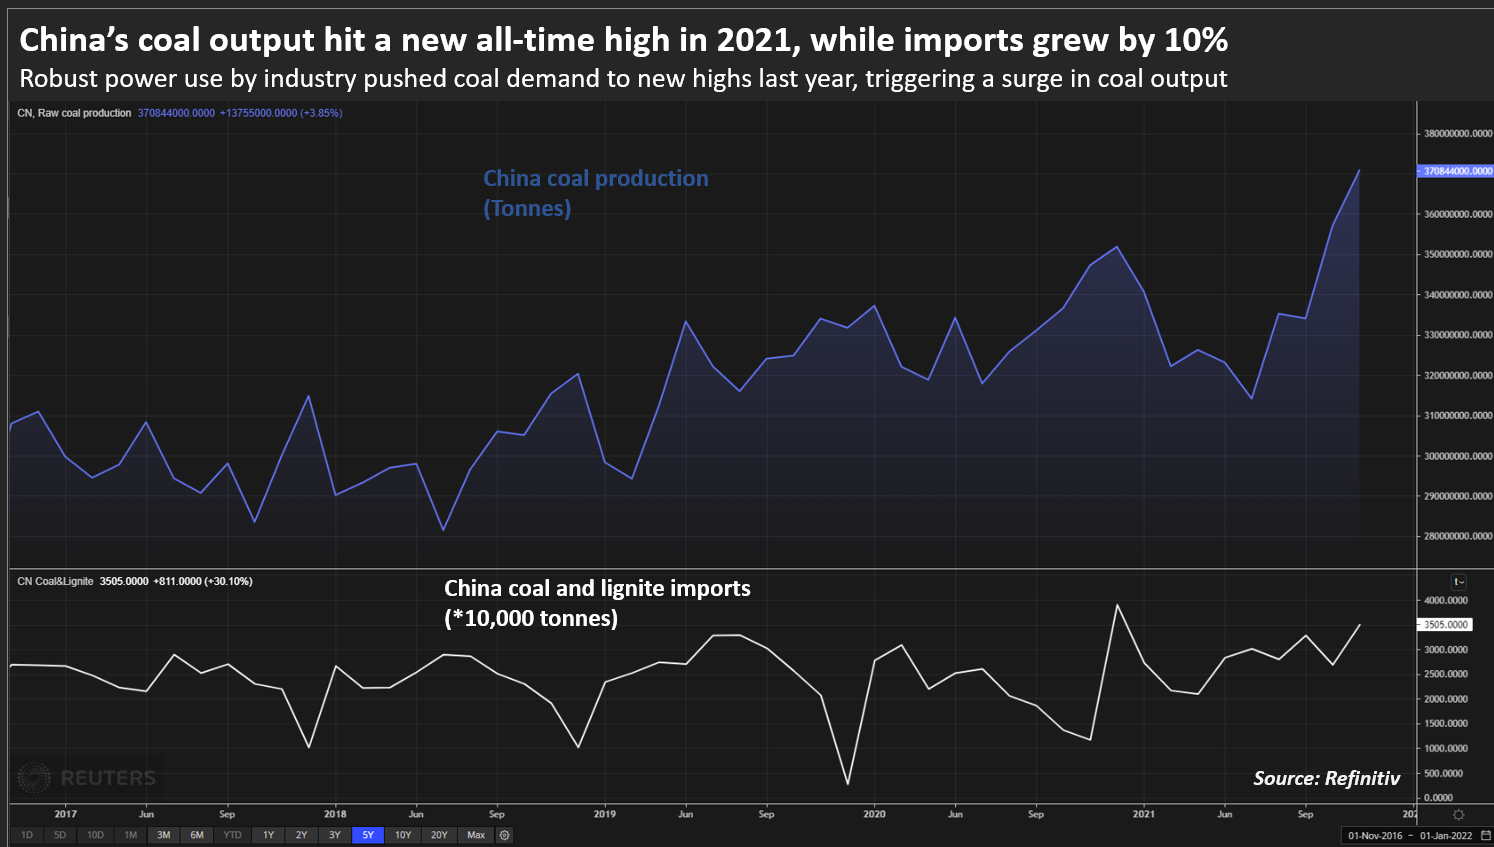 China’s coal output hit a new all-time high in 2021, while imports grew by 10%